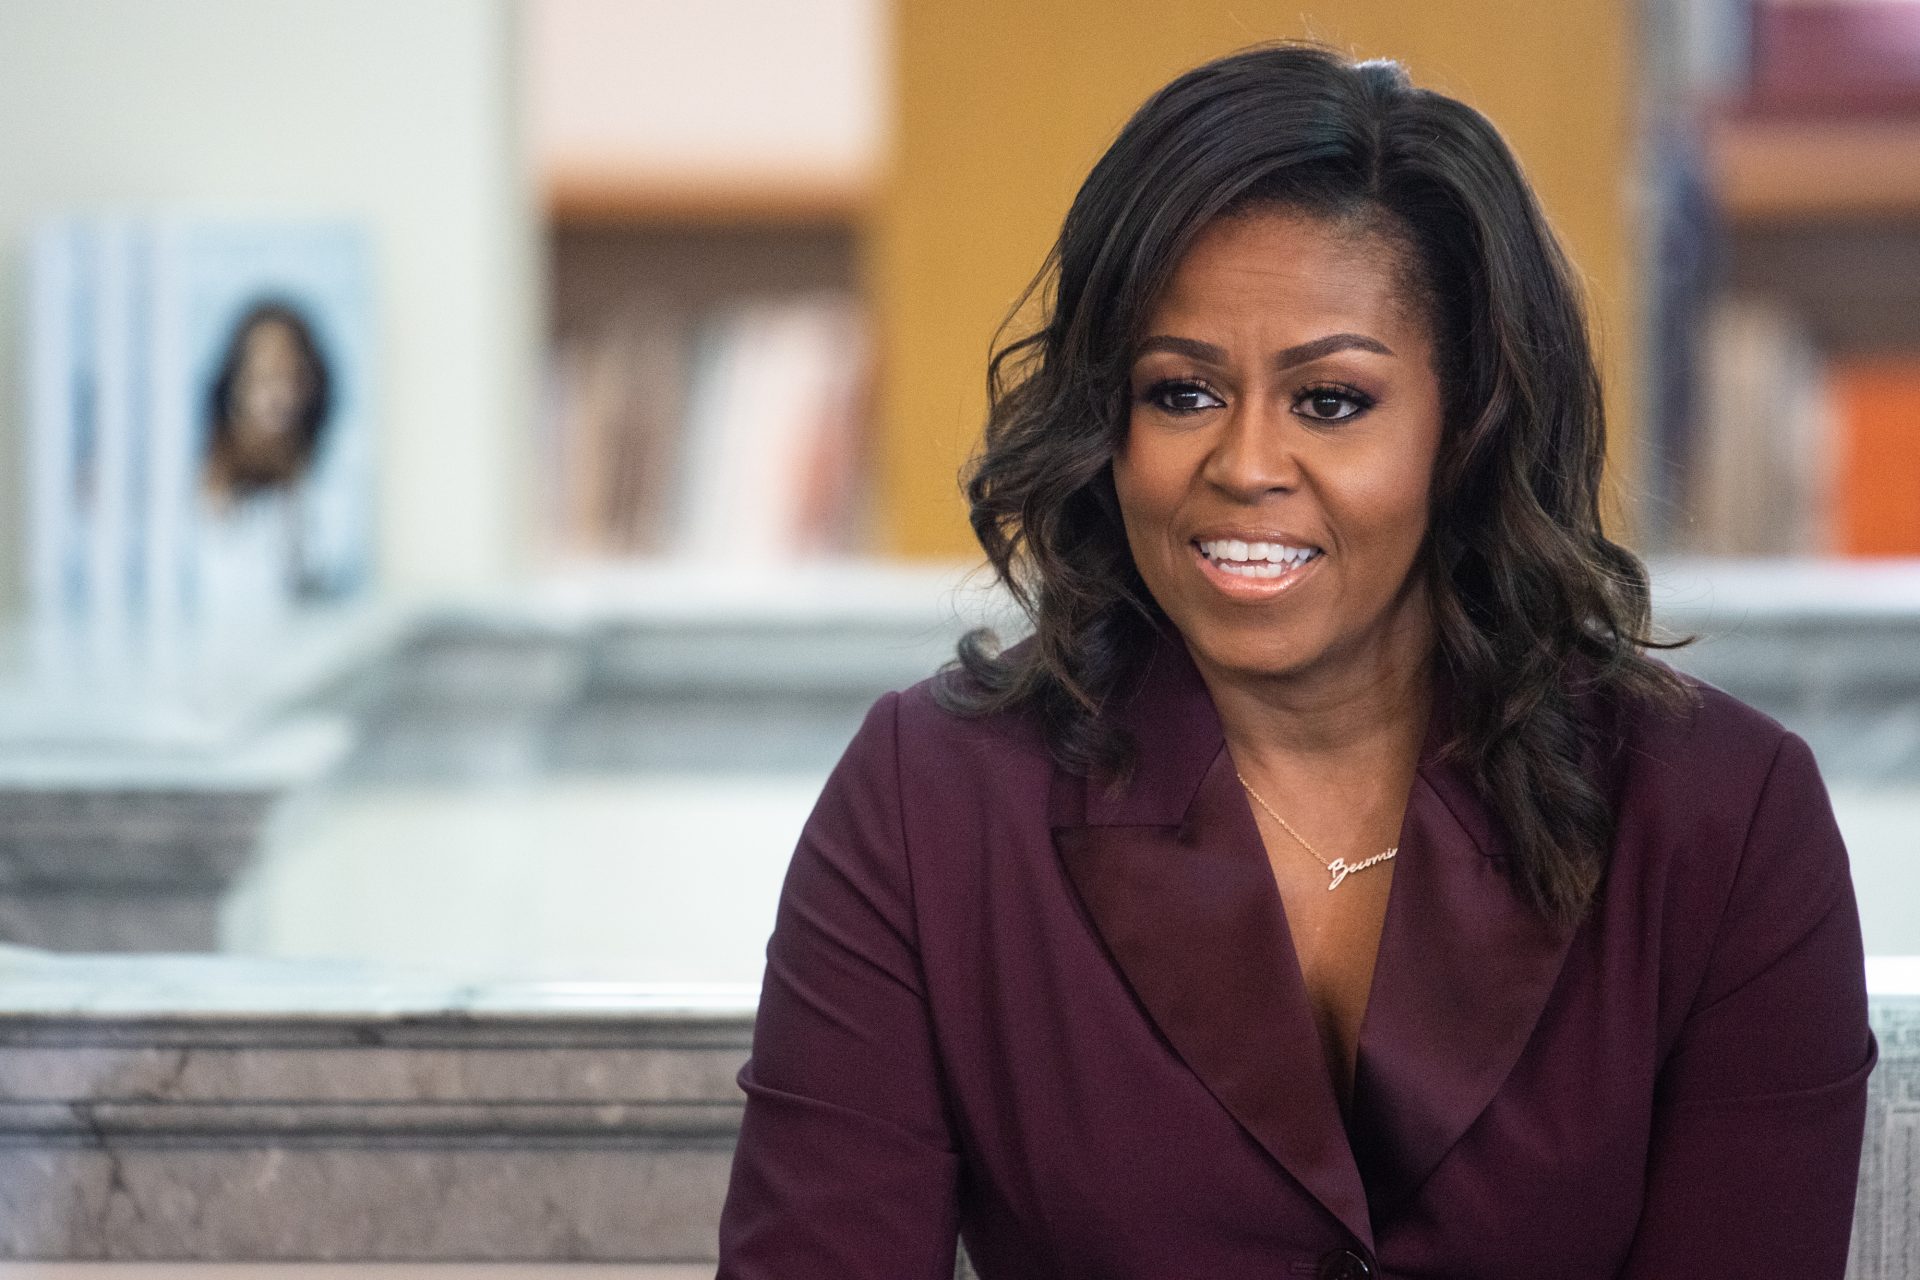 Is Michelle Obama the best candidate the Democrats can run against Trump in November?